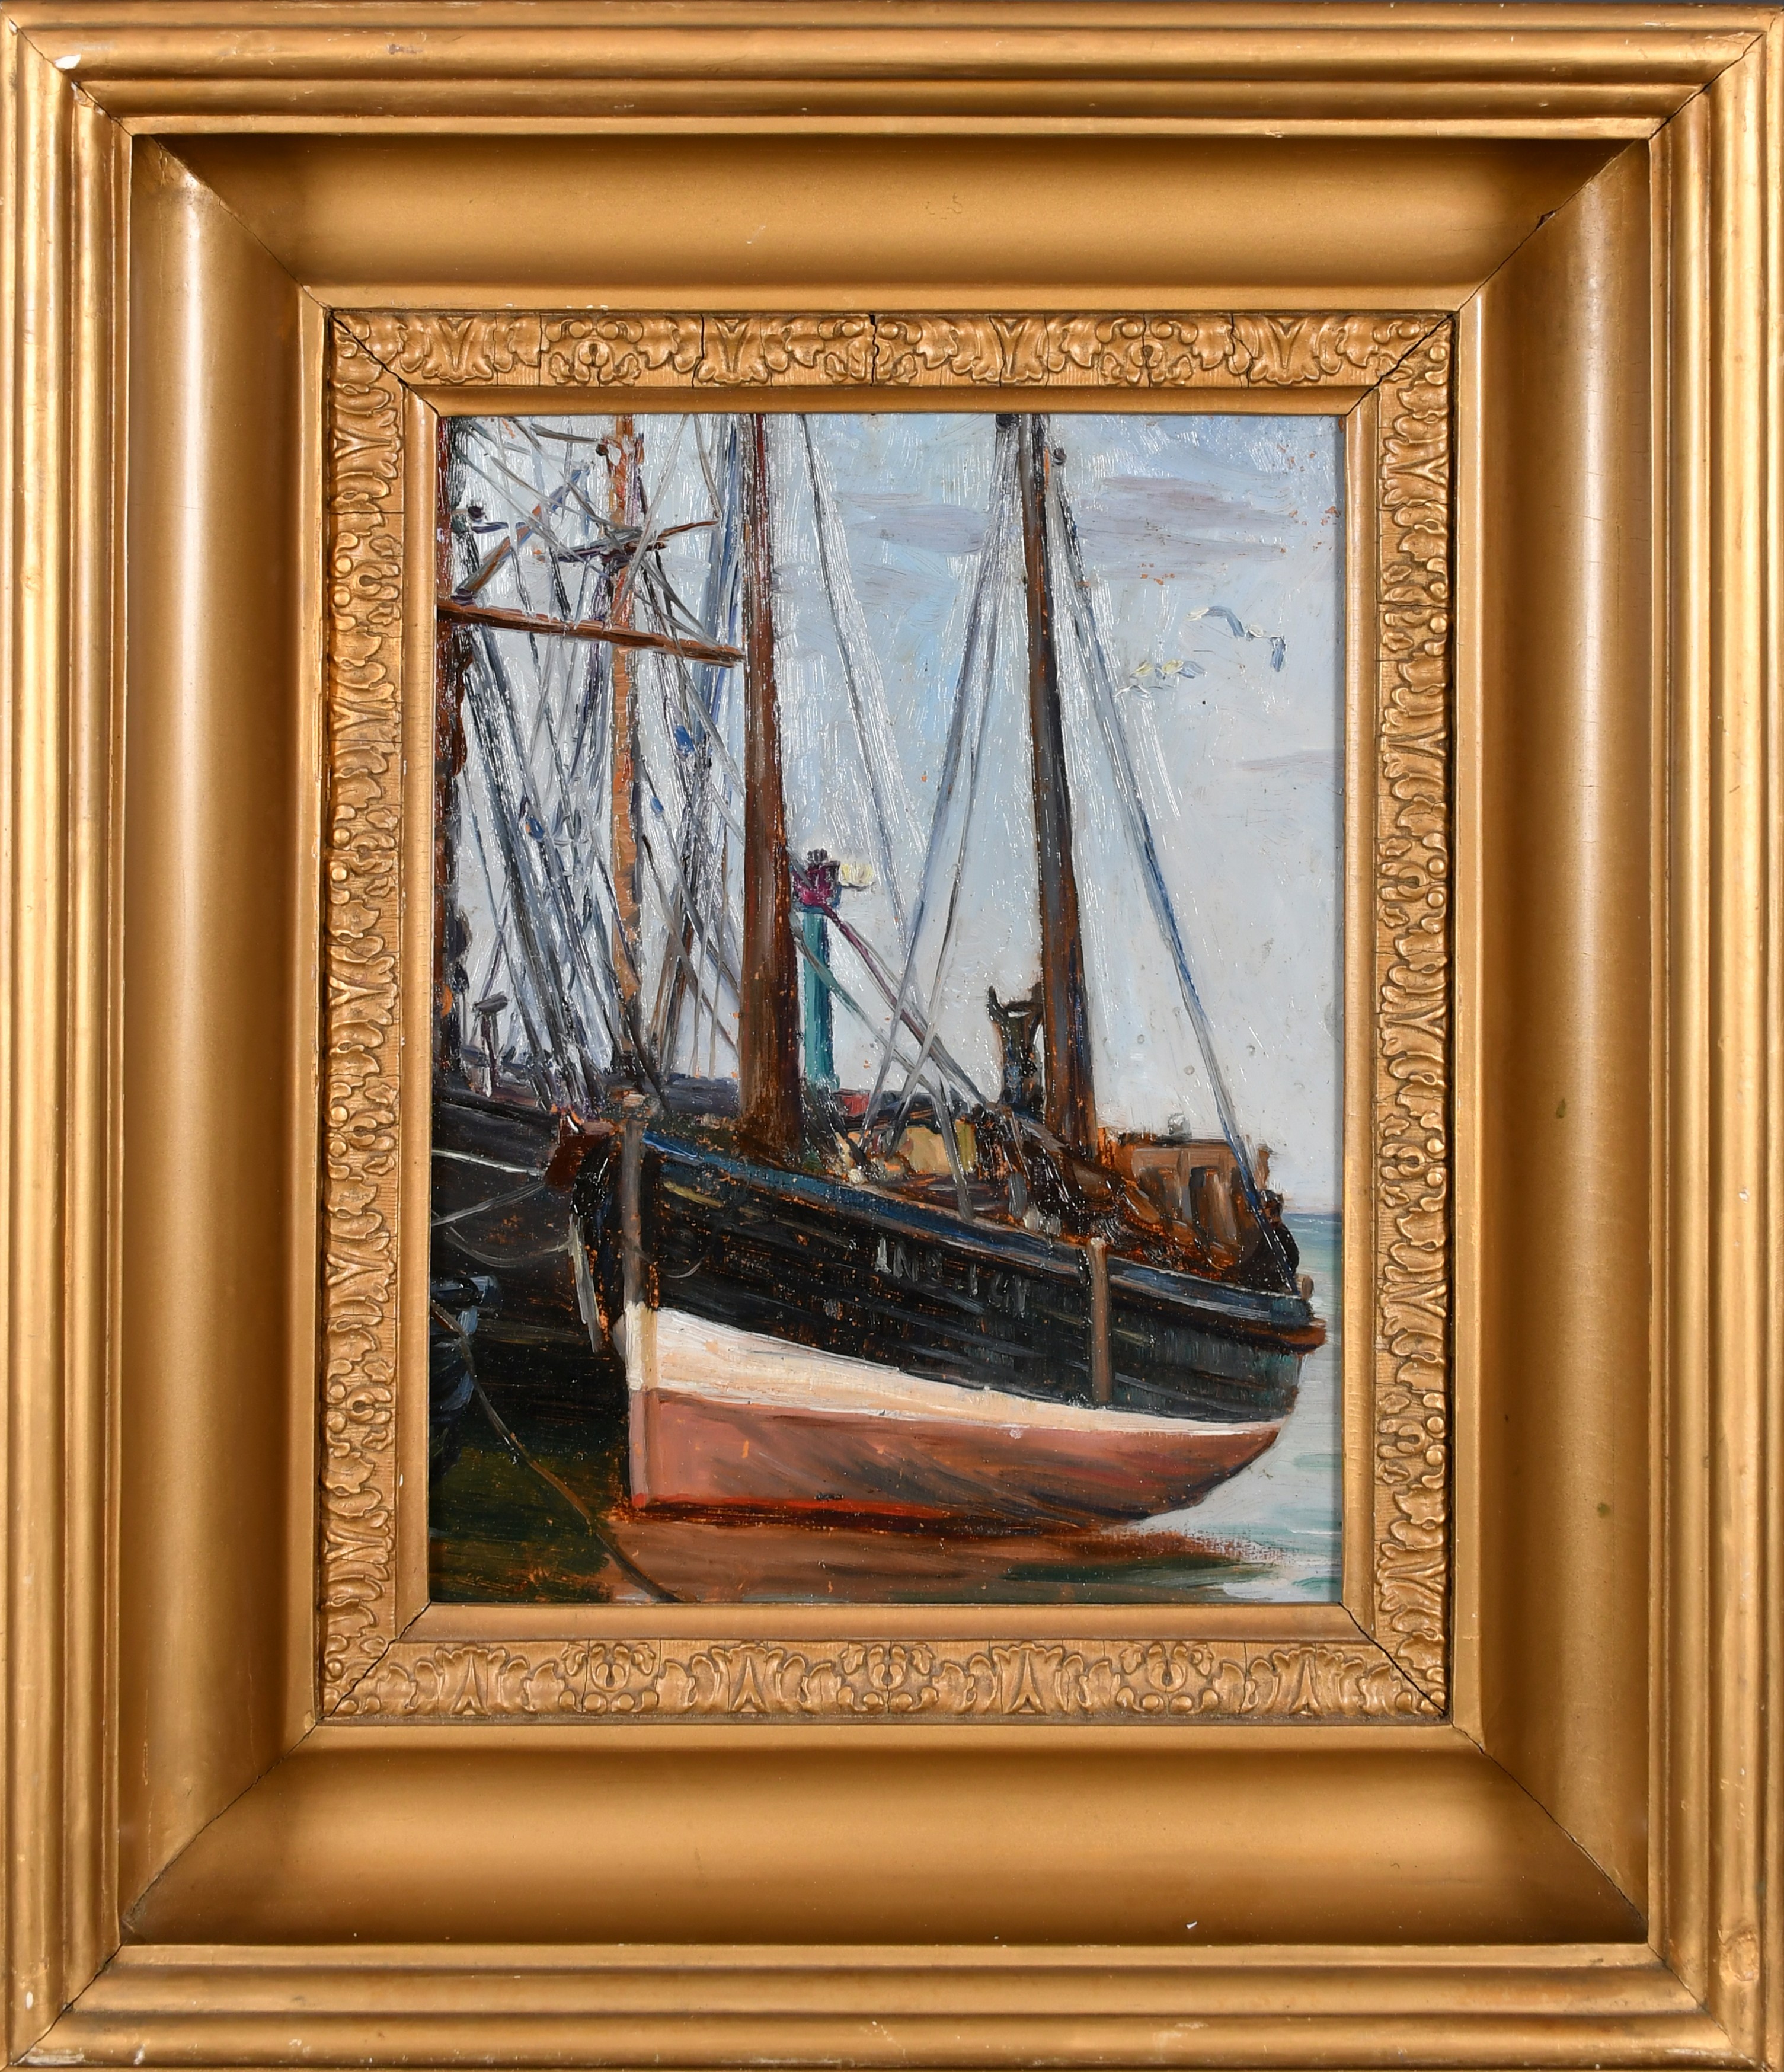 Early 20th Century English School. A Moored Boat, Oil on board, 13.5" x 10.25" (34.3 x 26cm) - Image 2 of 3